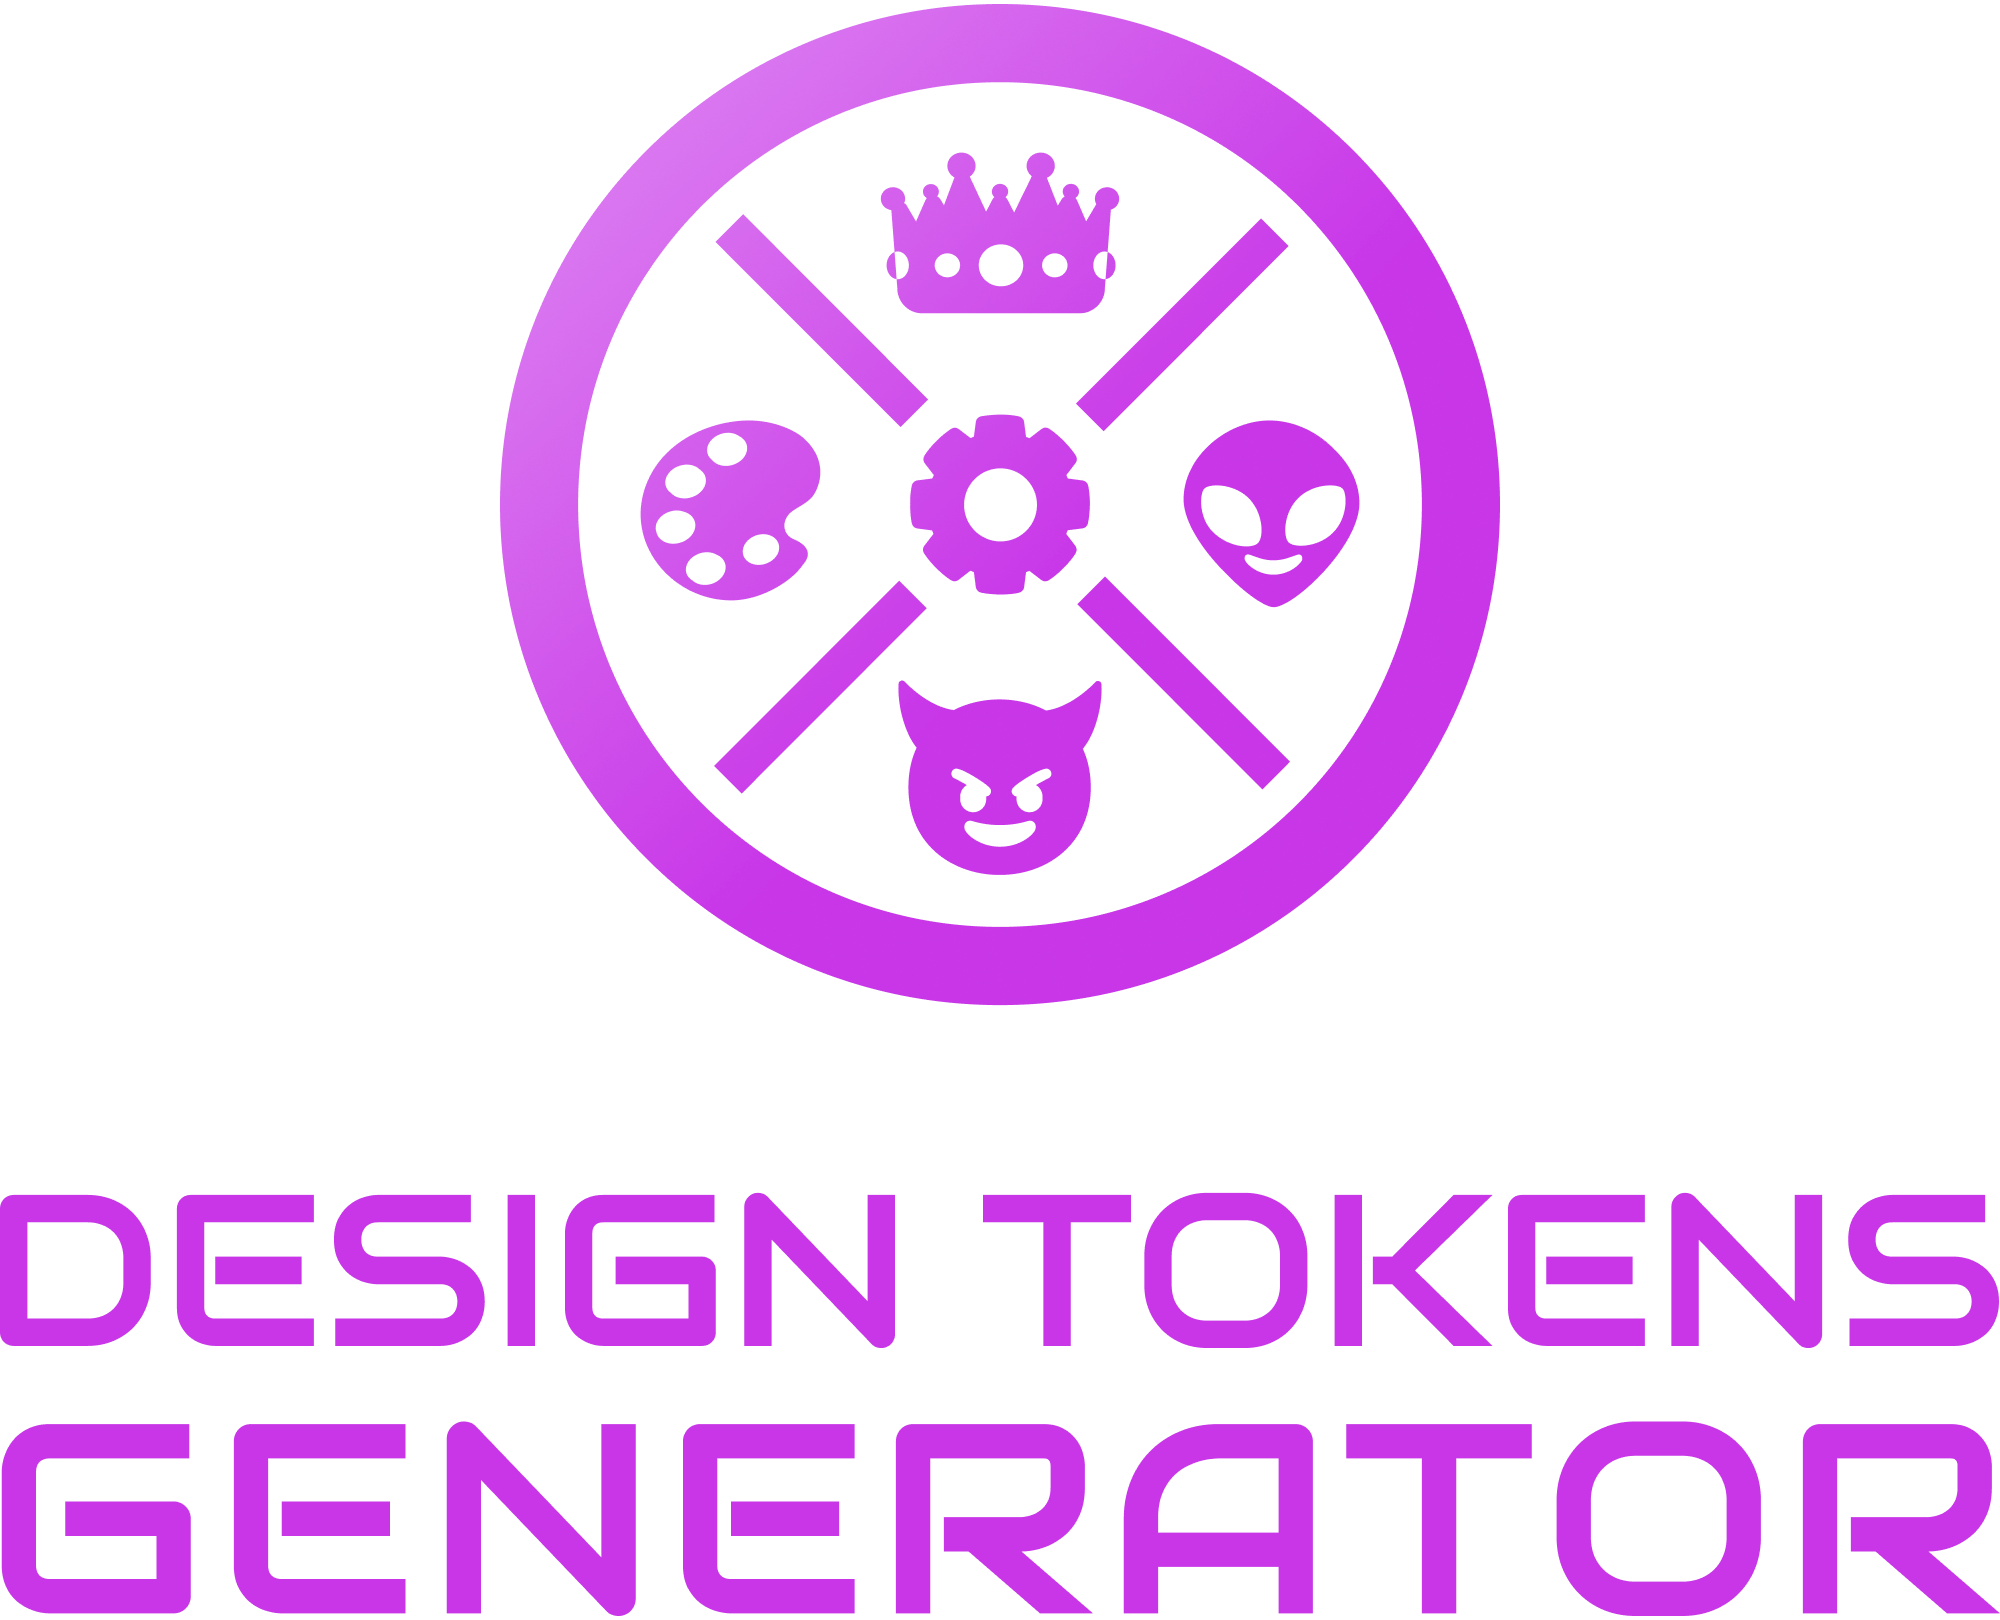 Design Tokens Generator Logo vertical centered layout, at the top there is the group of 4 icons — crown, alien, devil and palette — around a cog icon element and at the bottom there is a title